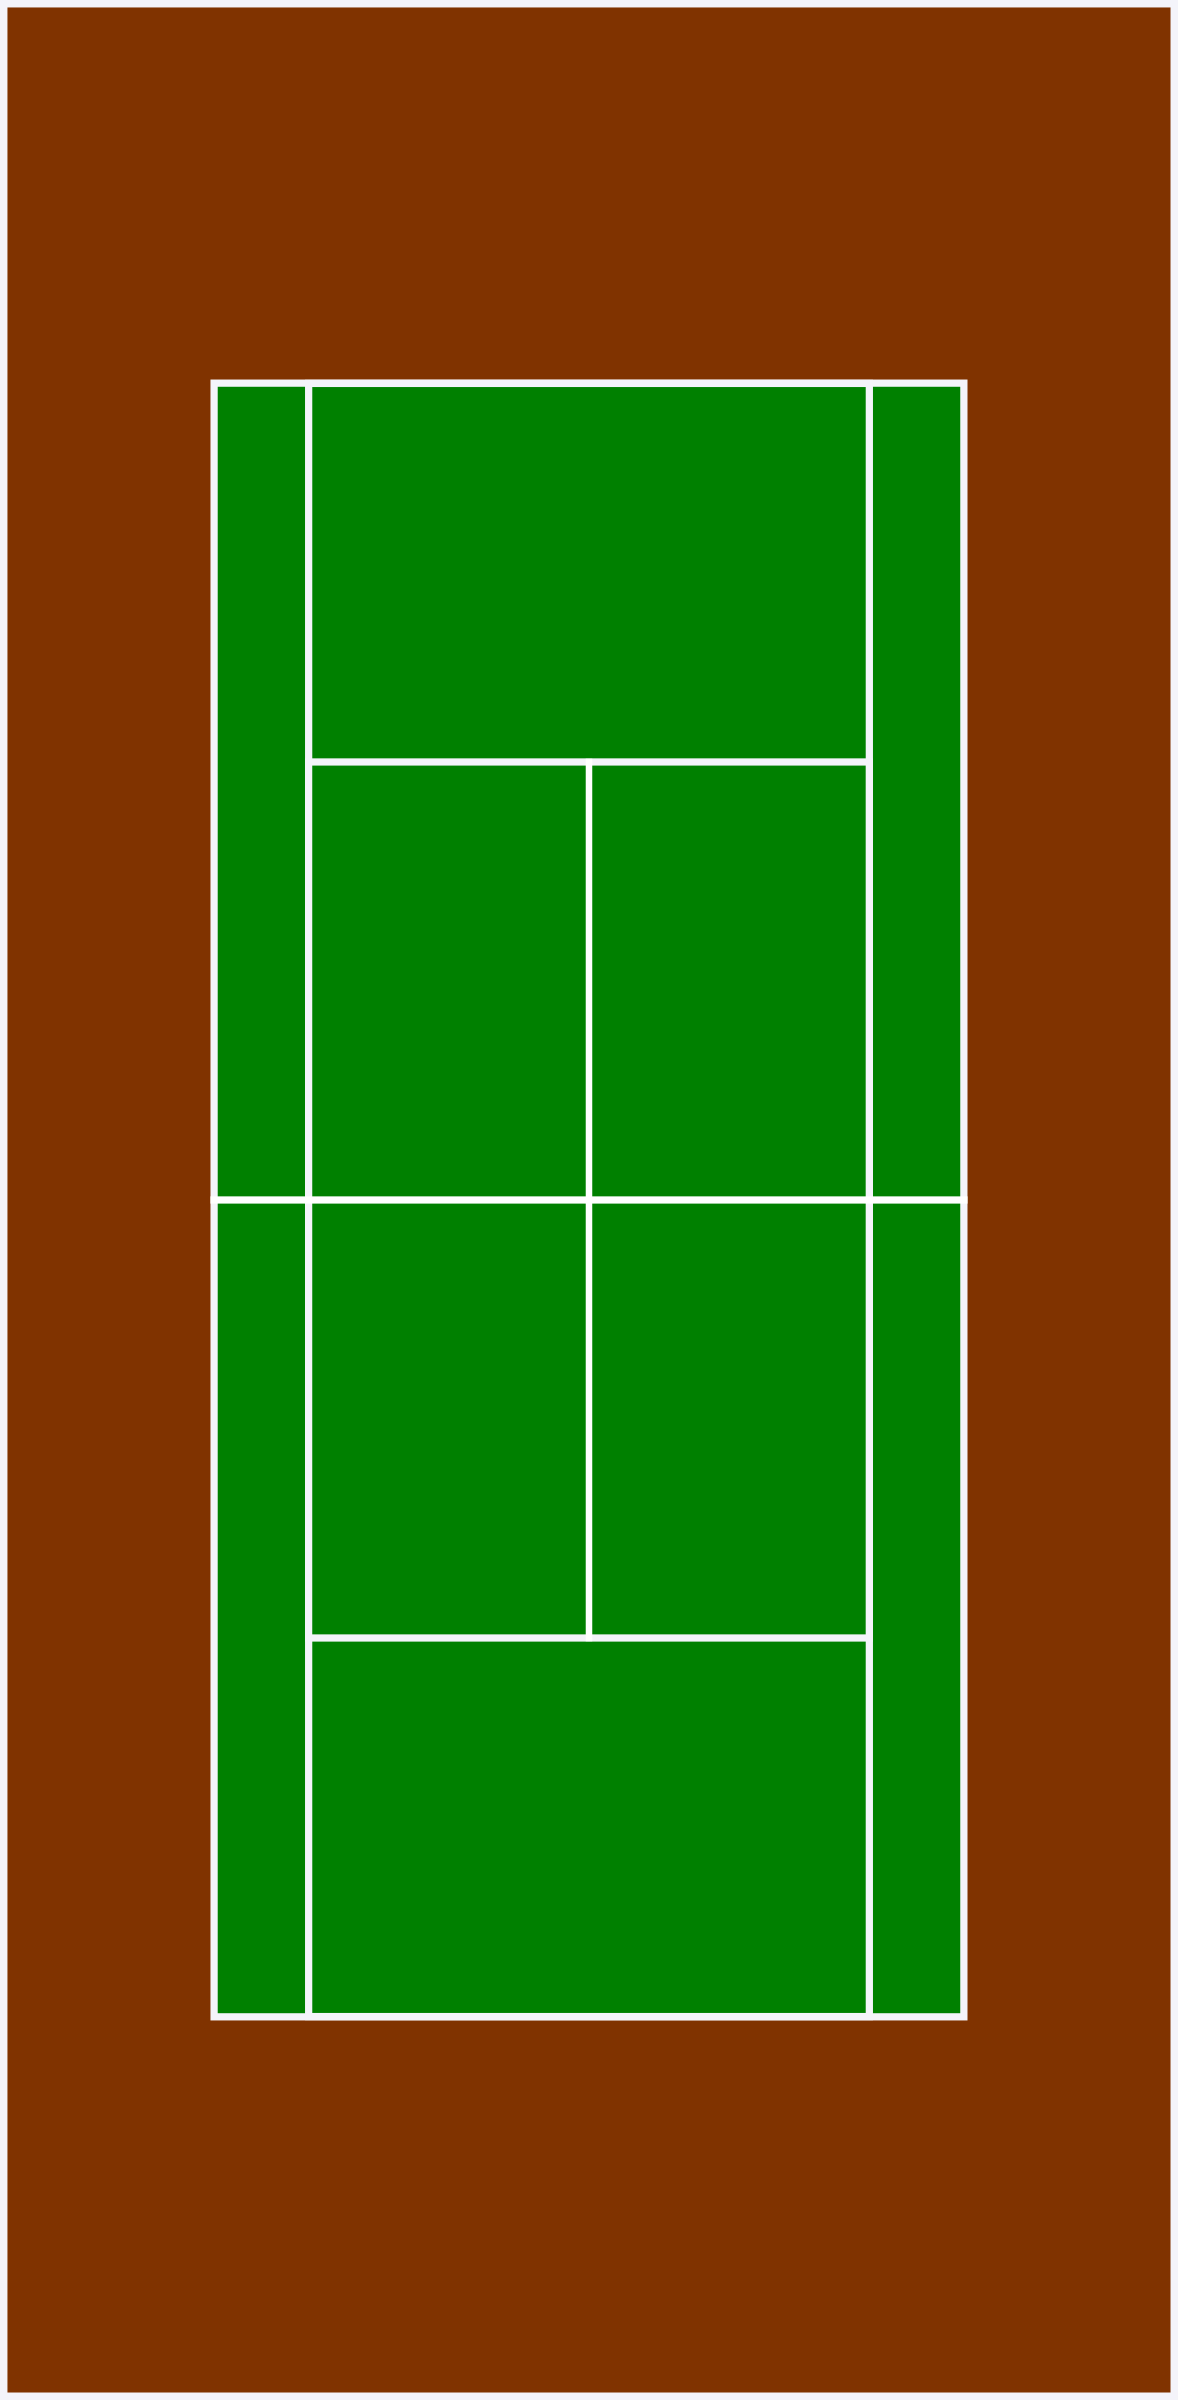 Tennis court png » PNG Image.